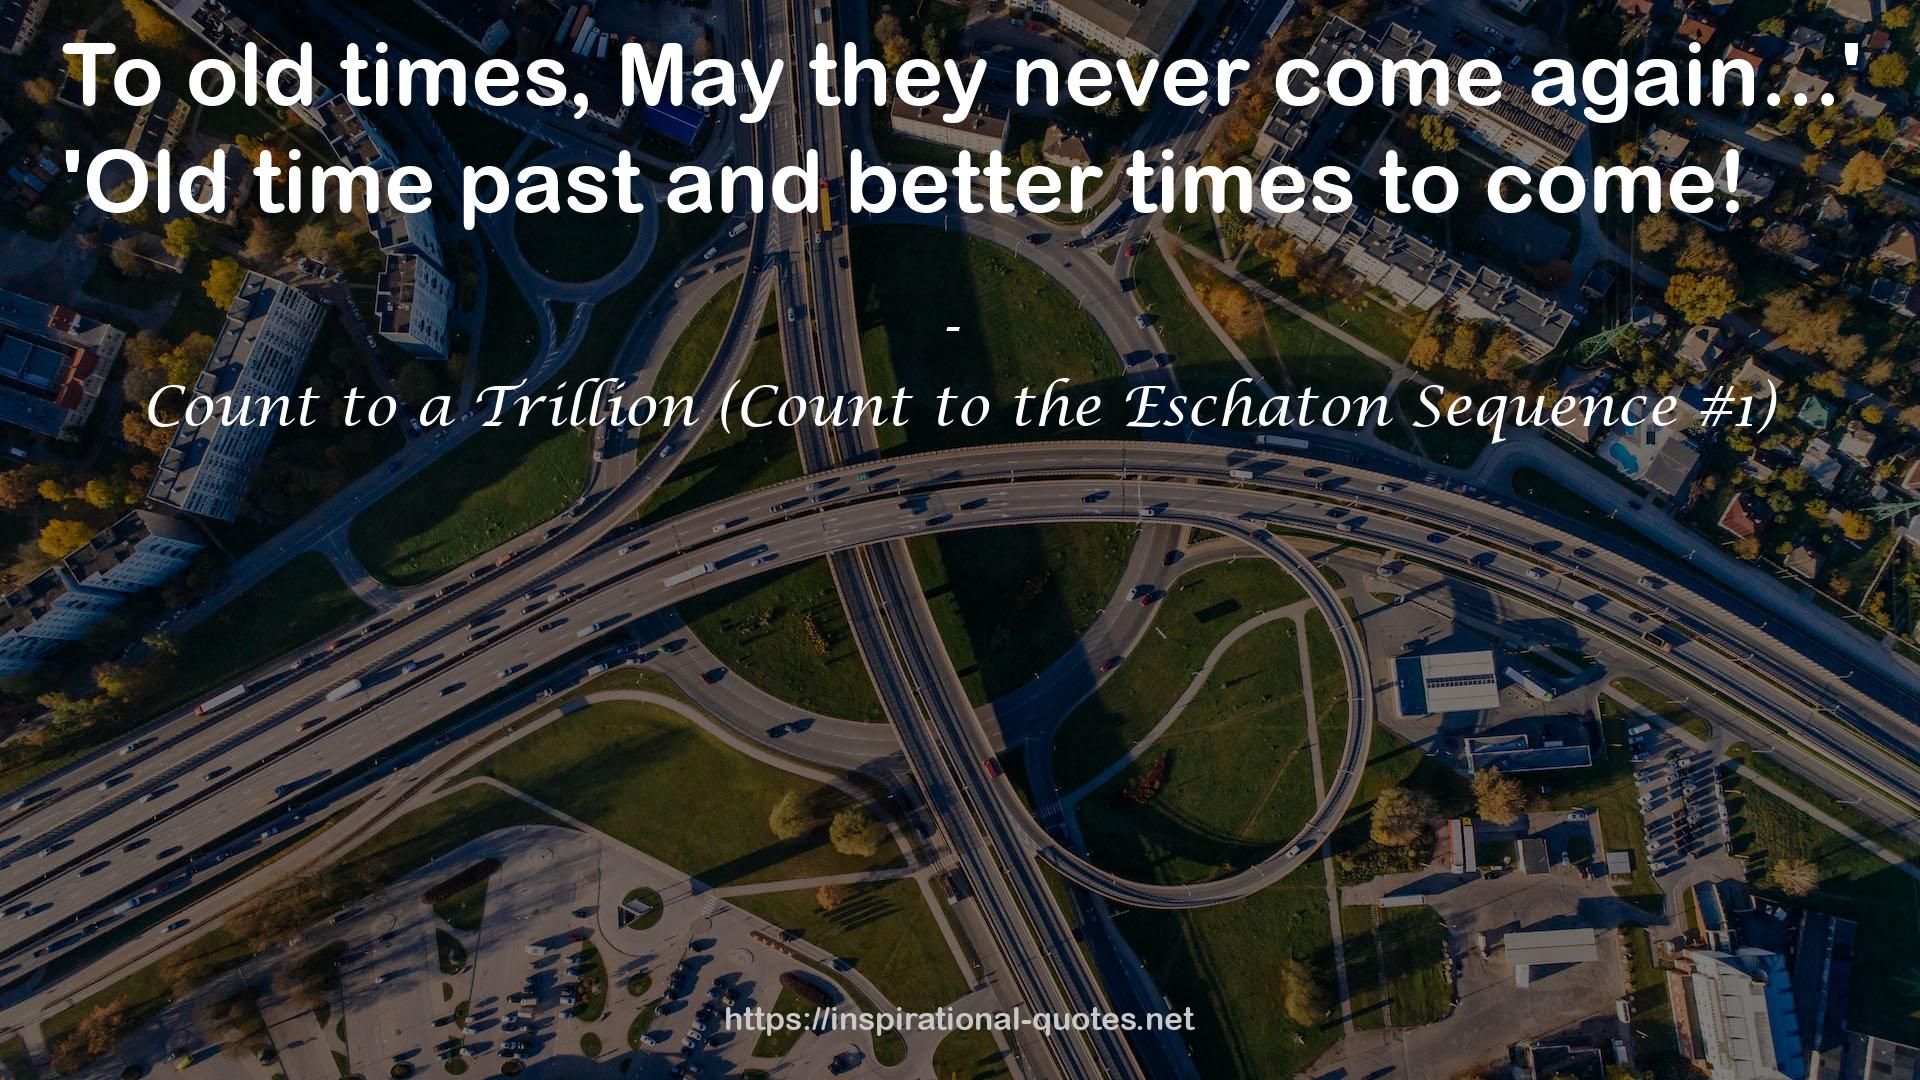 Count to a Trillion (Count to the Eschaton Sequence #1) QUOTES